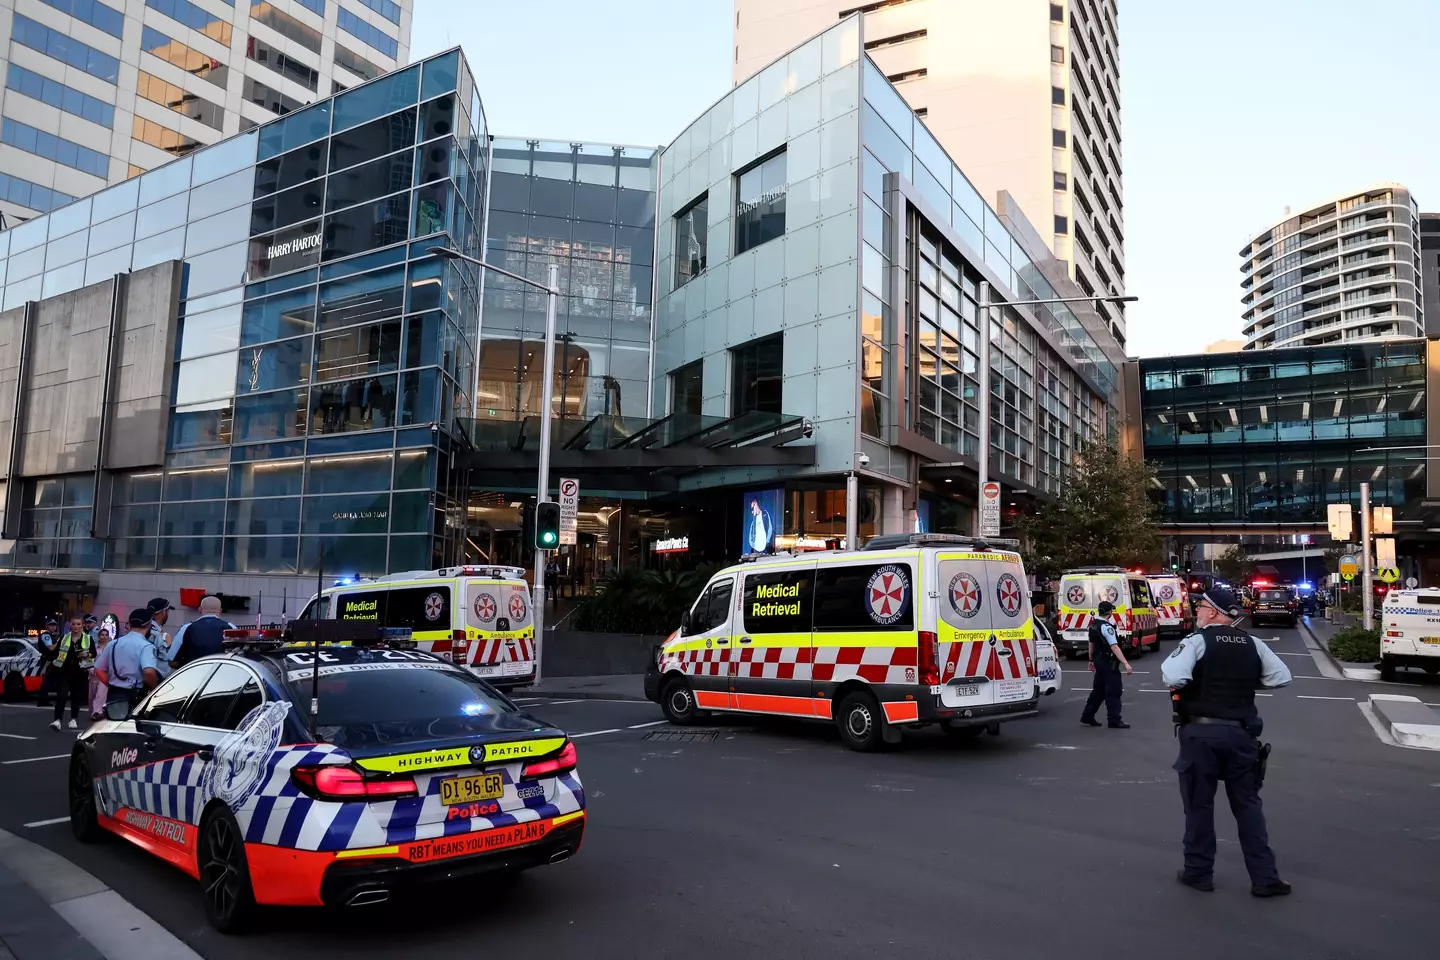 Joel Cauchi has been named as the attacker at the Sydney shopping mall. (DAVID GRAY/AFP via Getty Images)